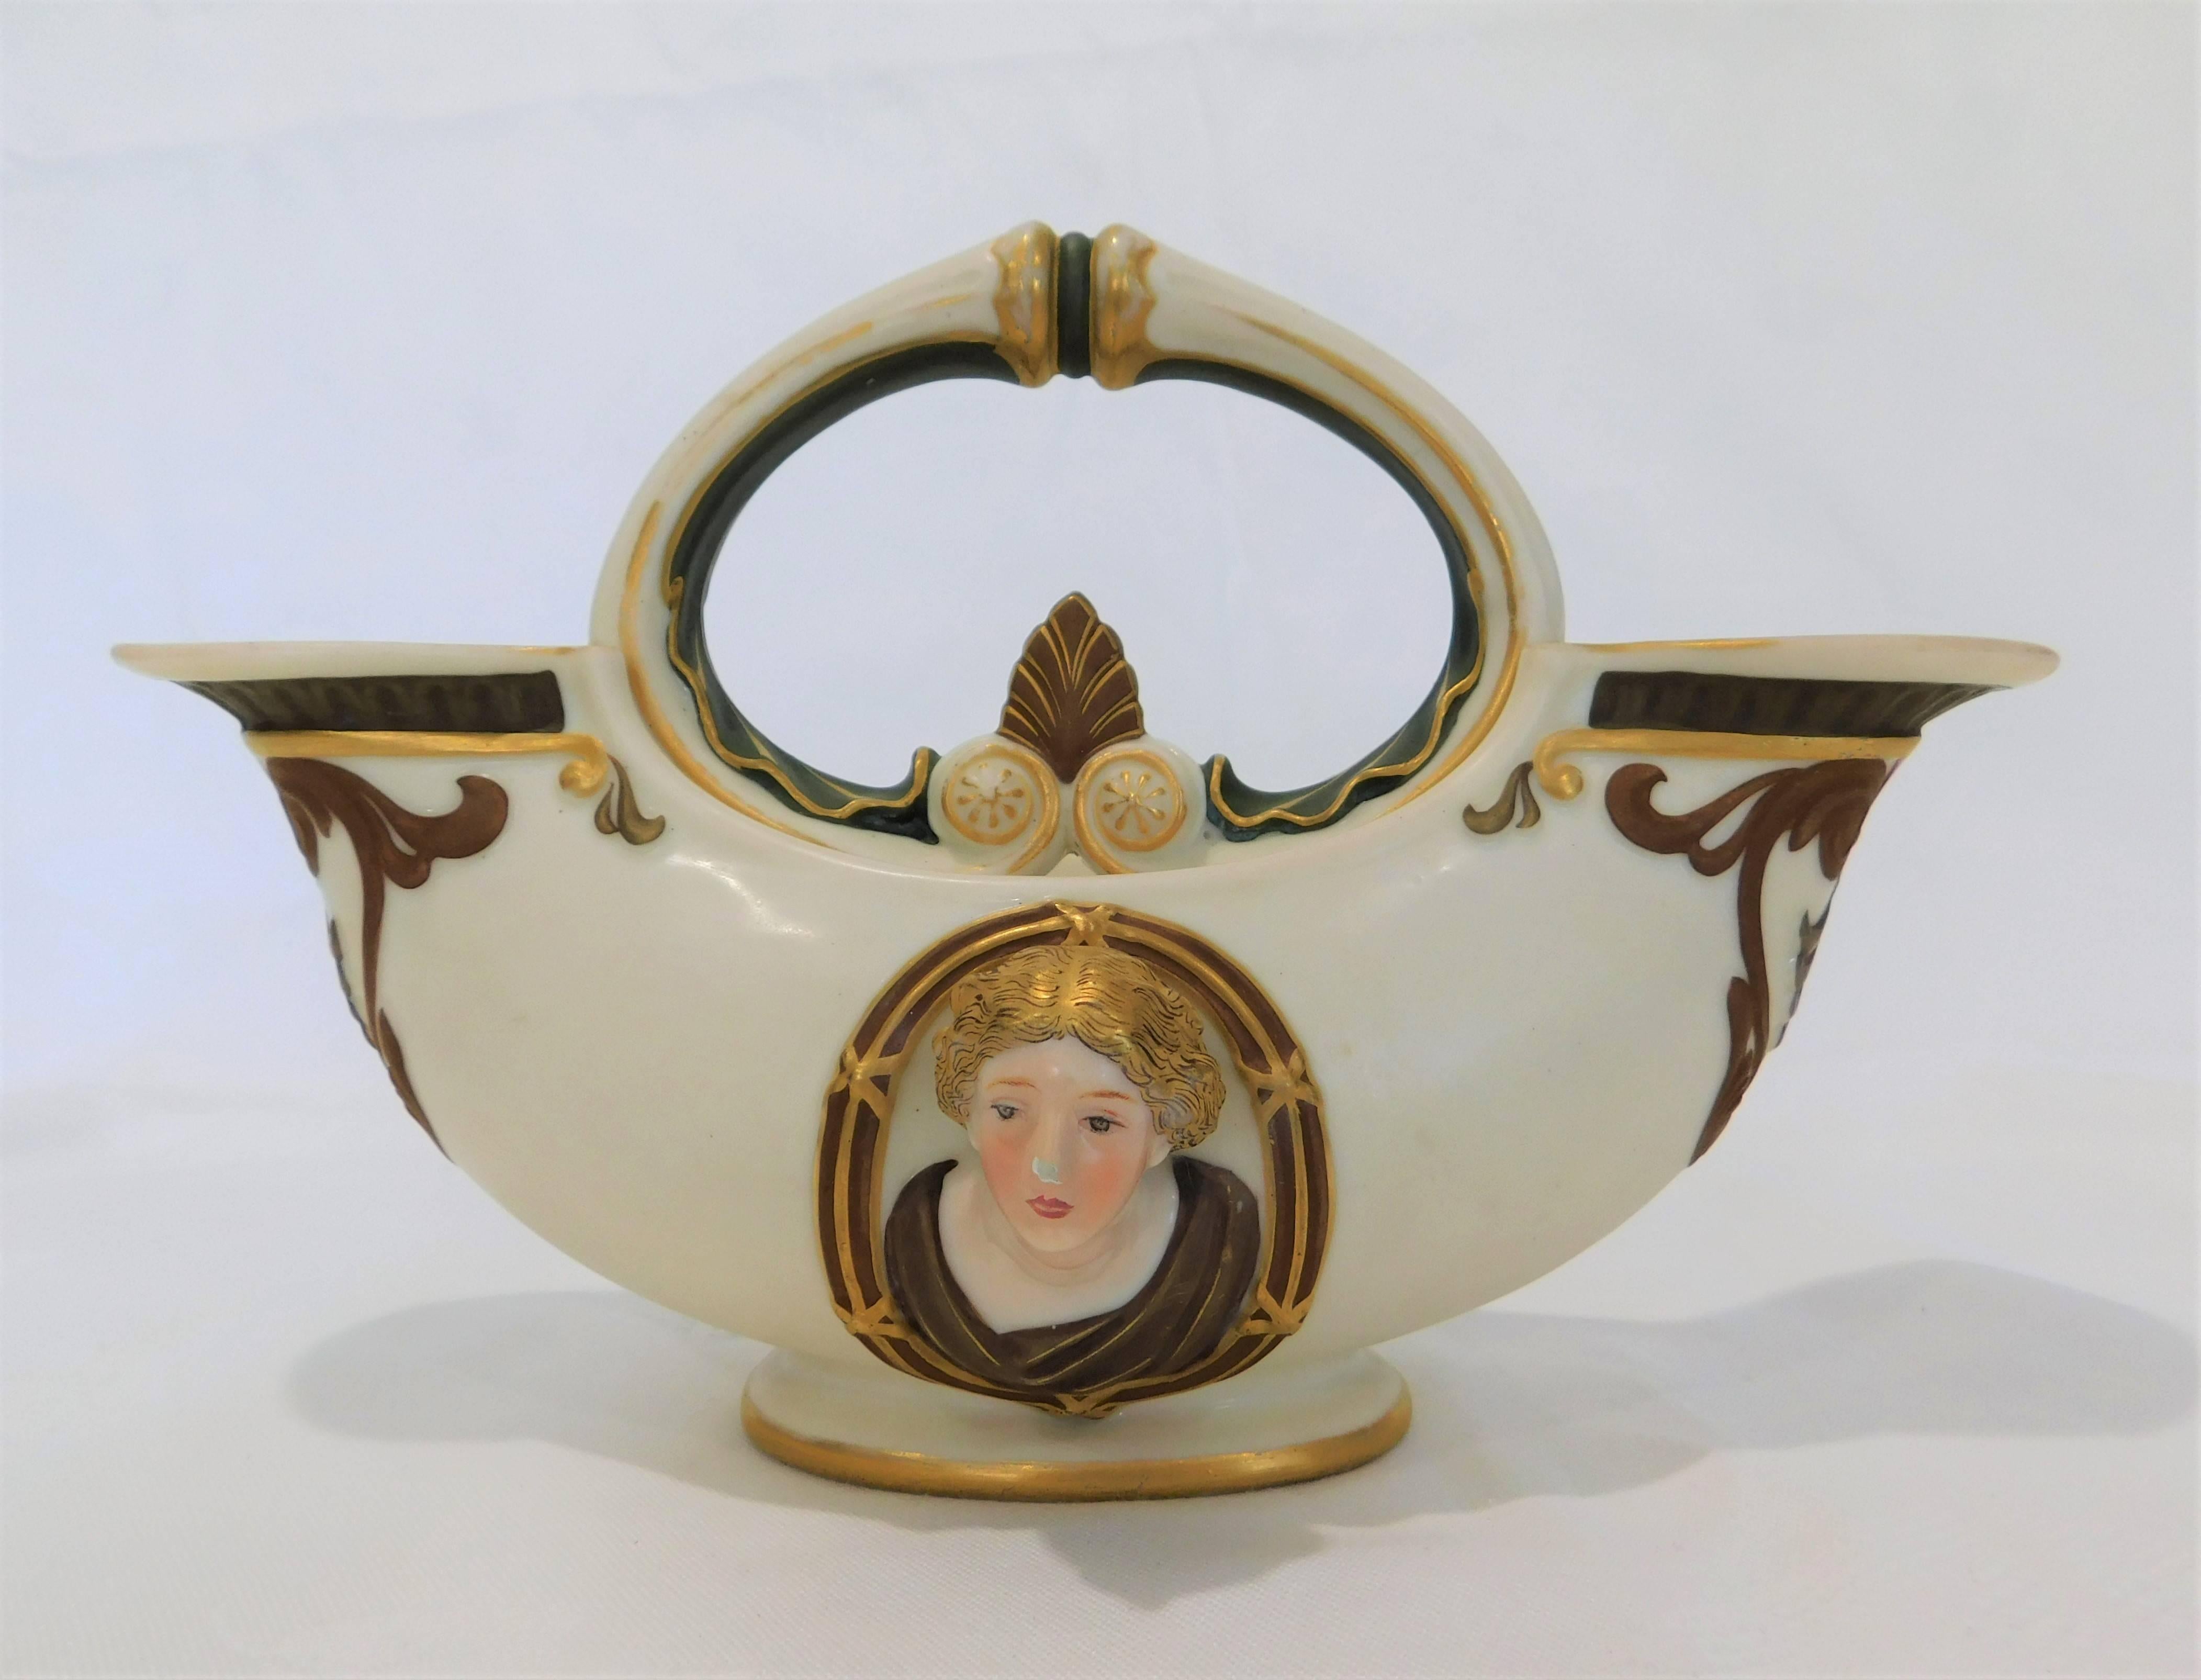 This ornate porcelain vase is in the shape of an archaic oil lamp. It has double heads and double spouts.